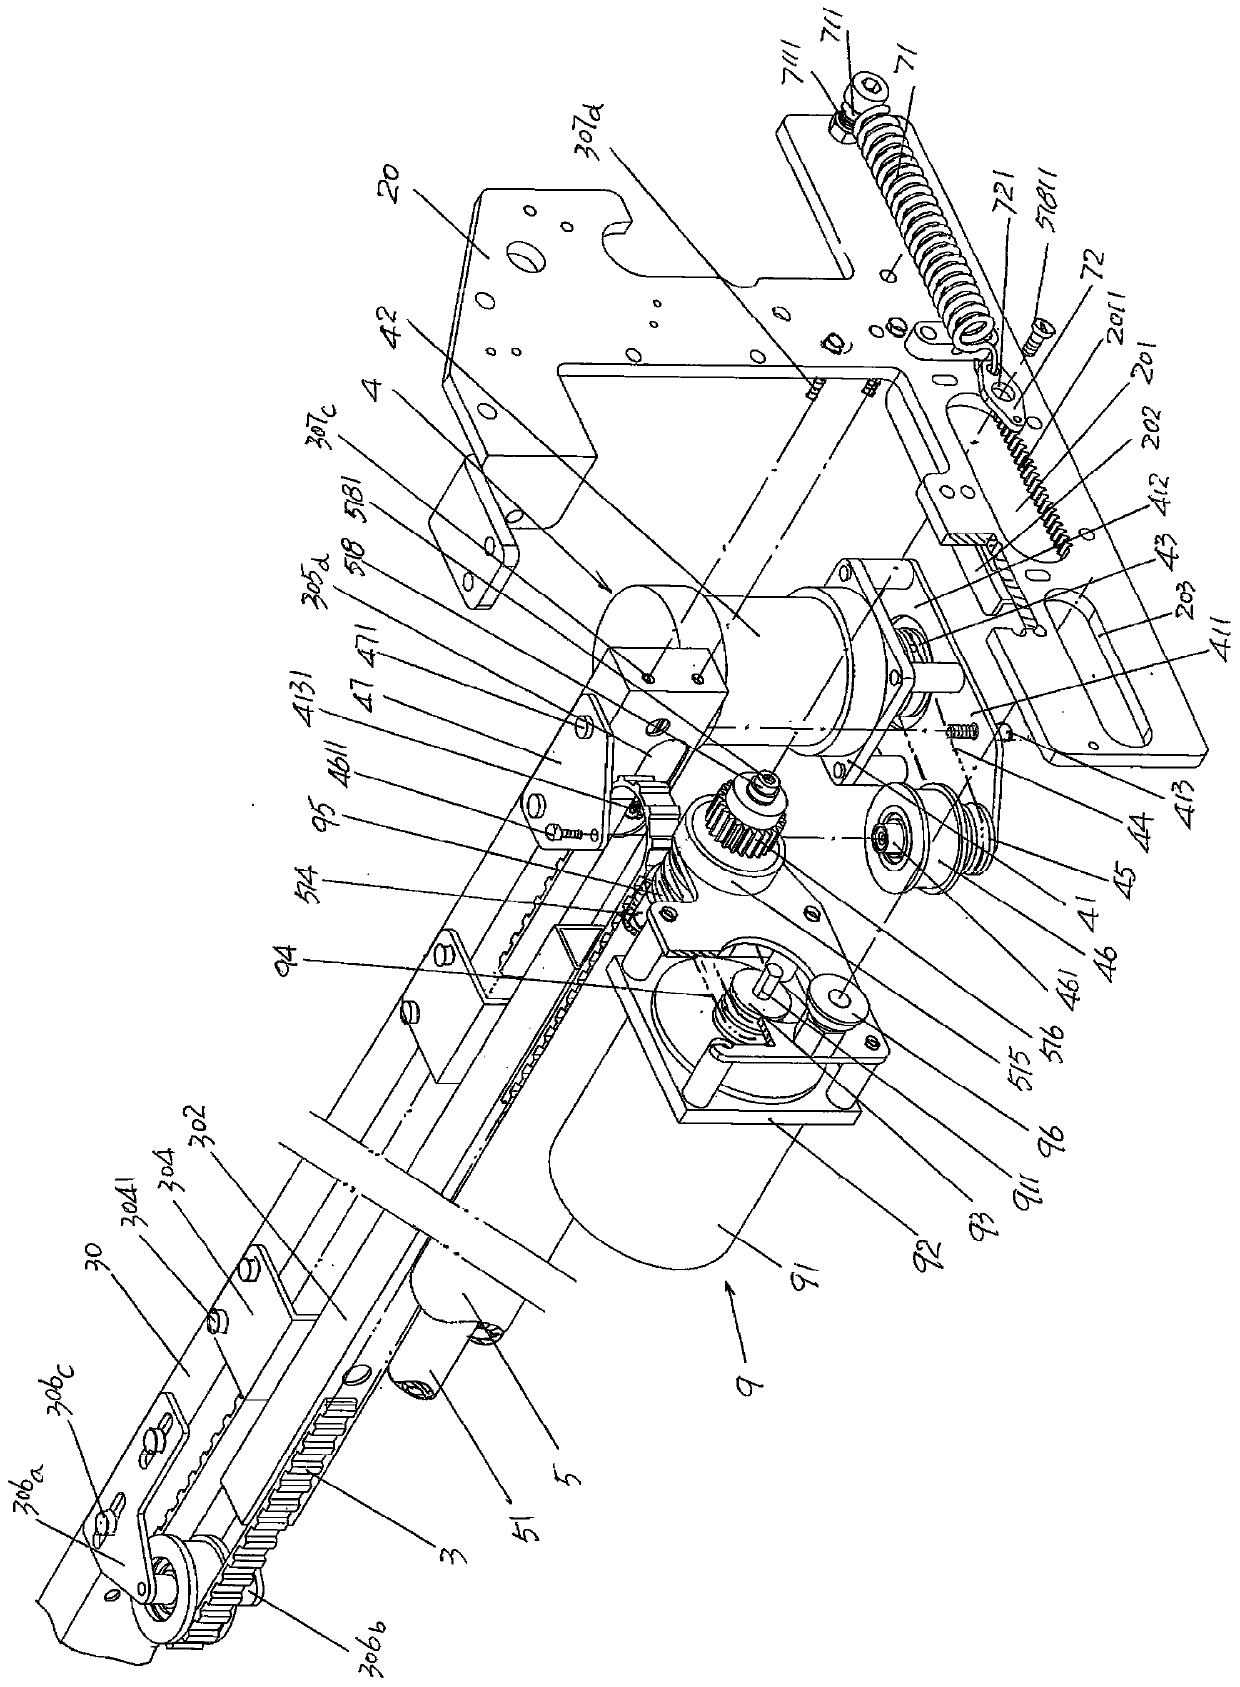 Lower edge unfolding device of spreading machine with cloth pressing function